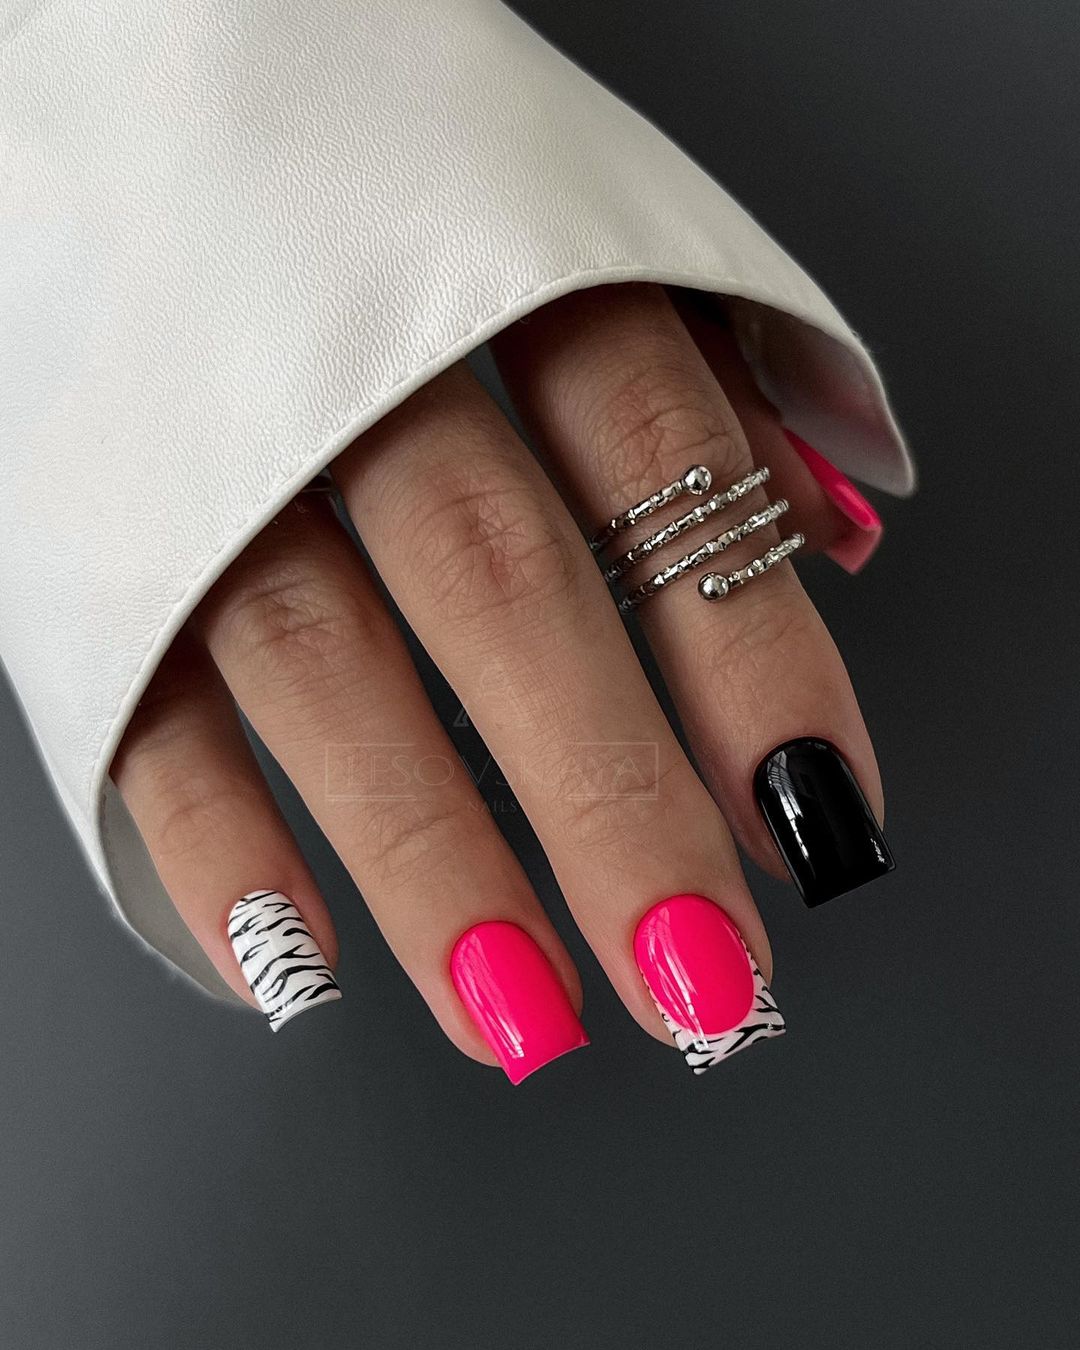 Square Pink and Black Nails with Zebra Design